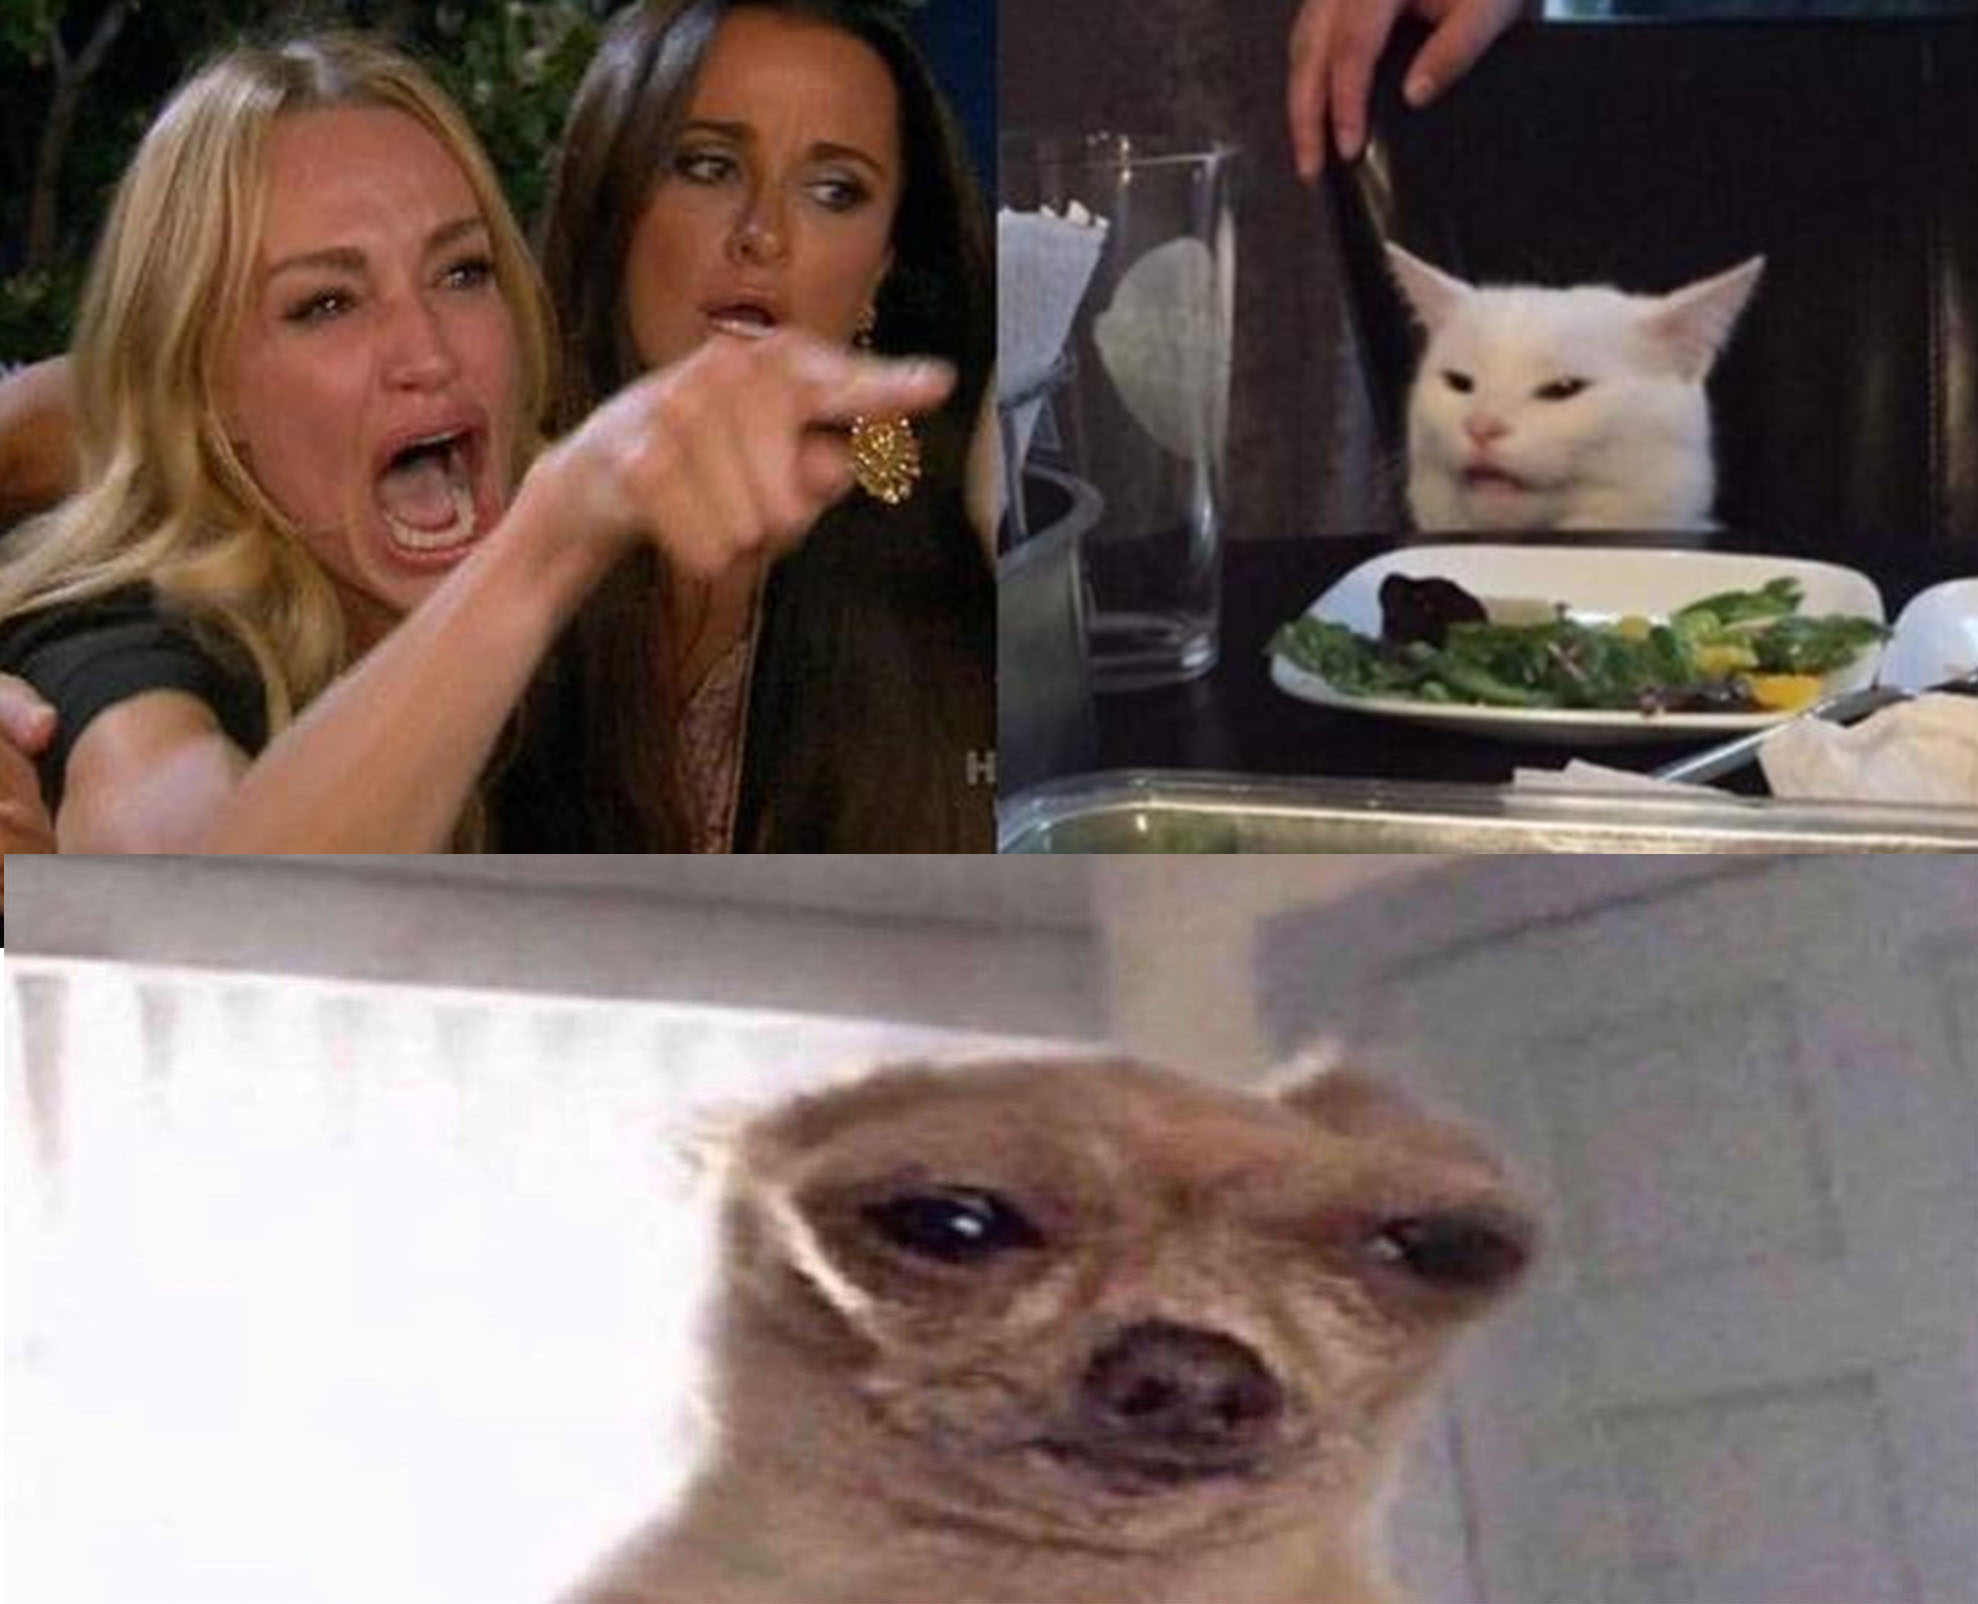 Lady yelling at cat meme template